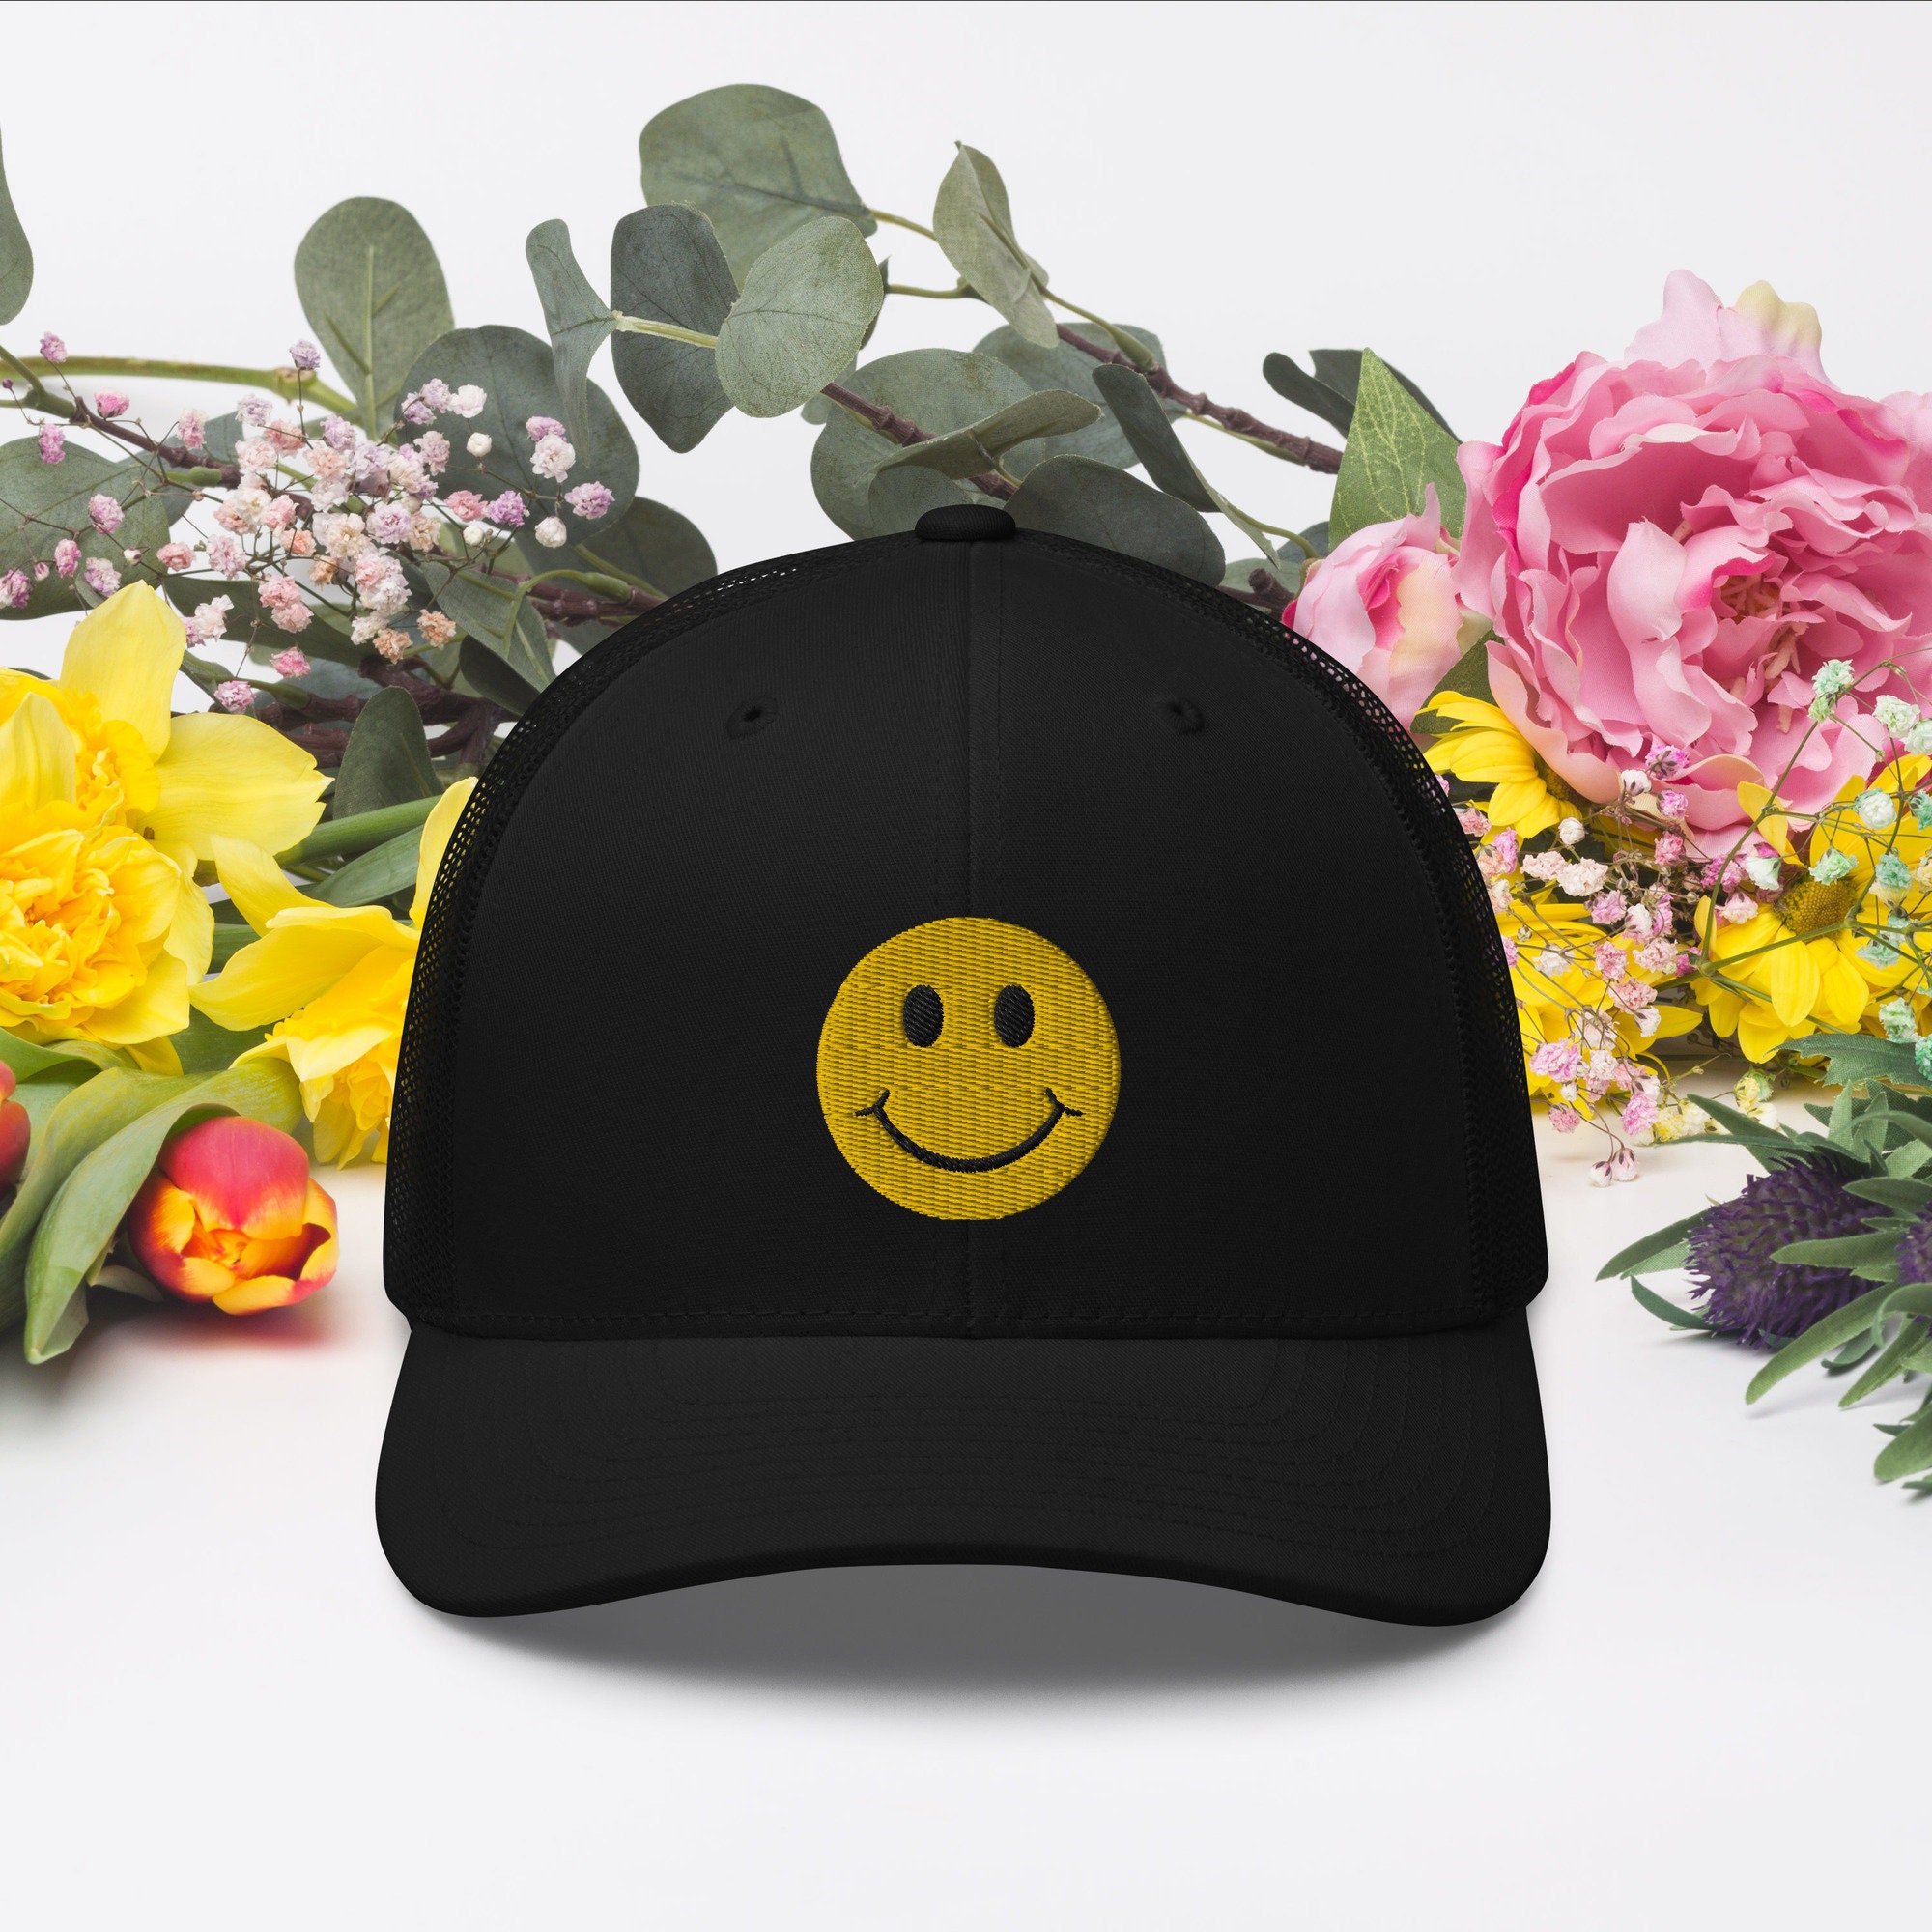 Smiley Face Embroidered Trucker Hat